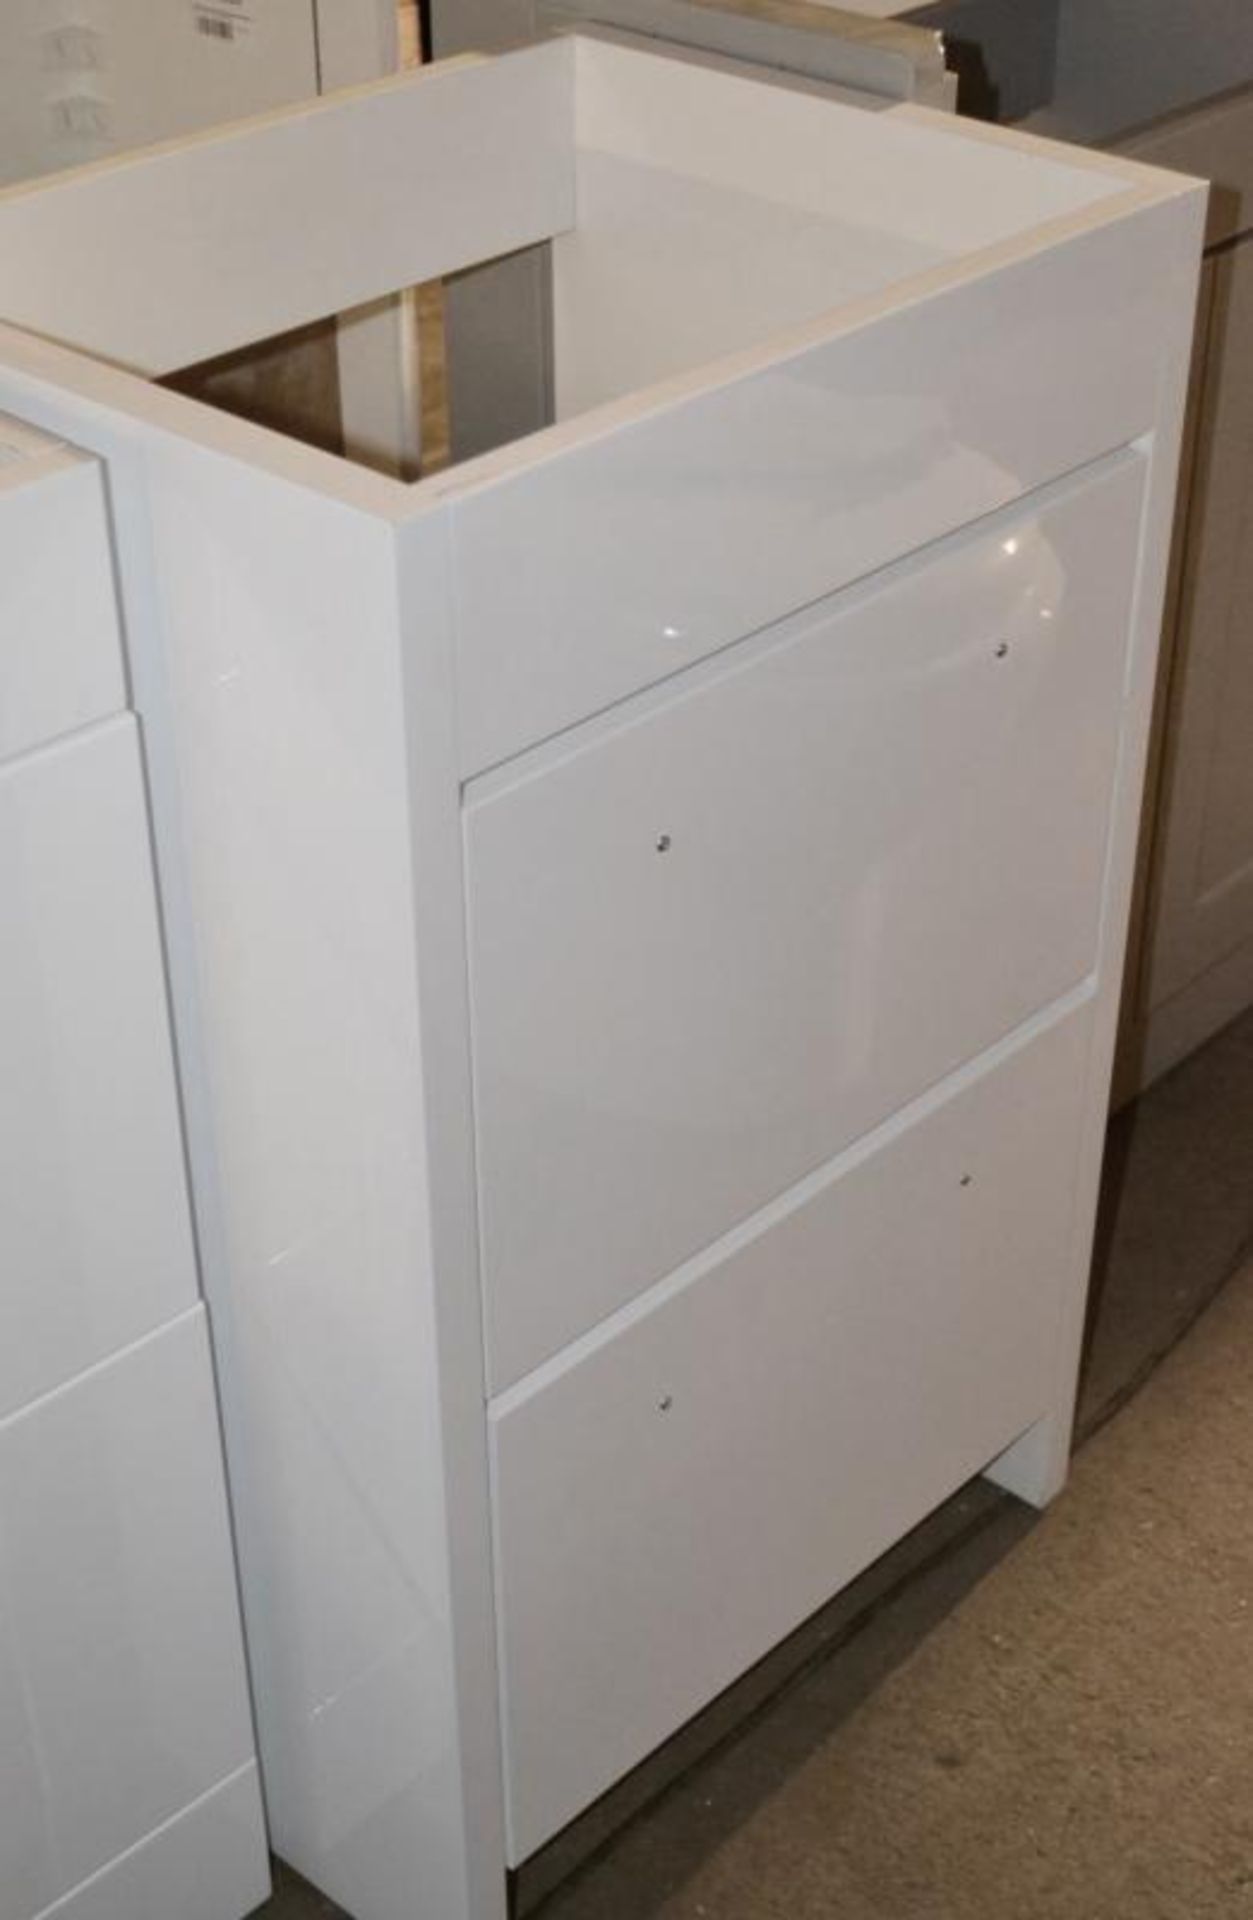 1 x Freestanding 2-Drawer Vanity Basin Unit In A Gloss White Finish - New / Unused Stock - Dimension